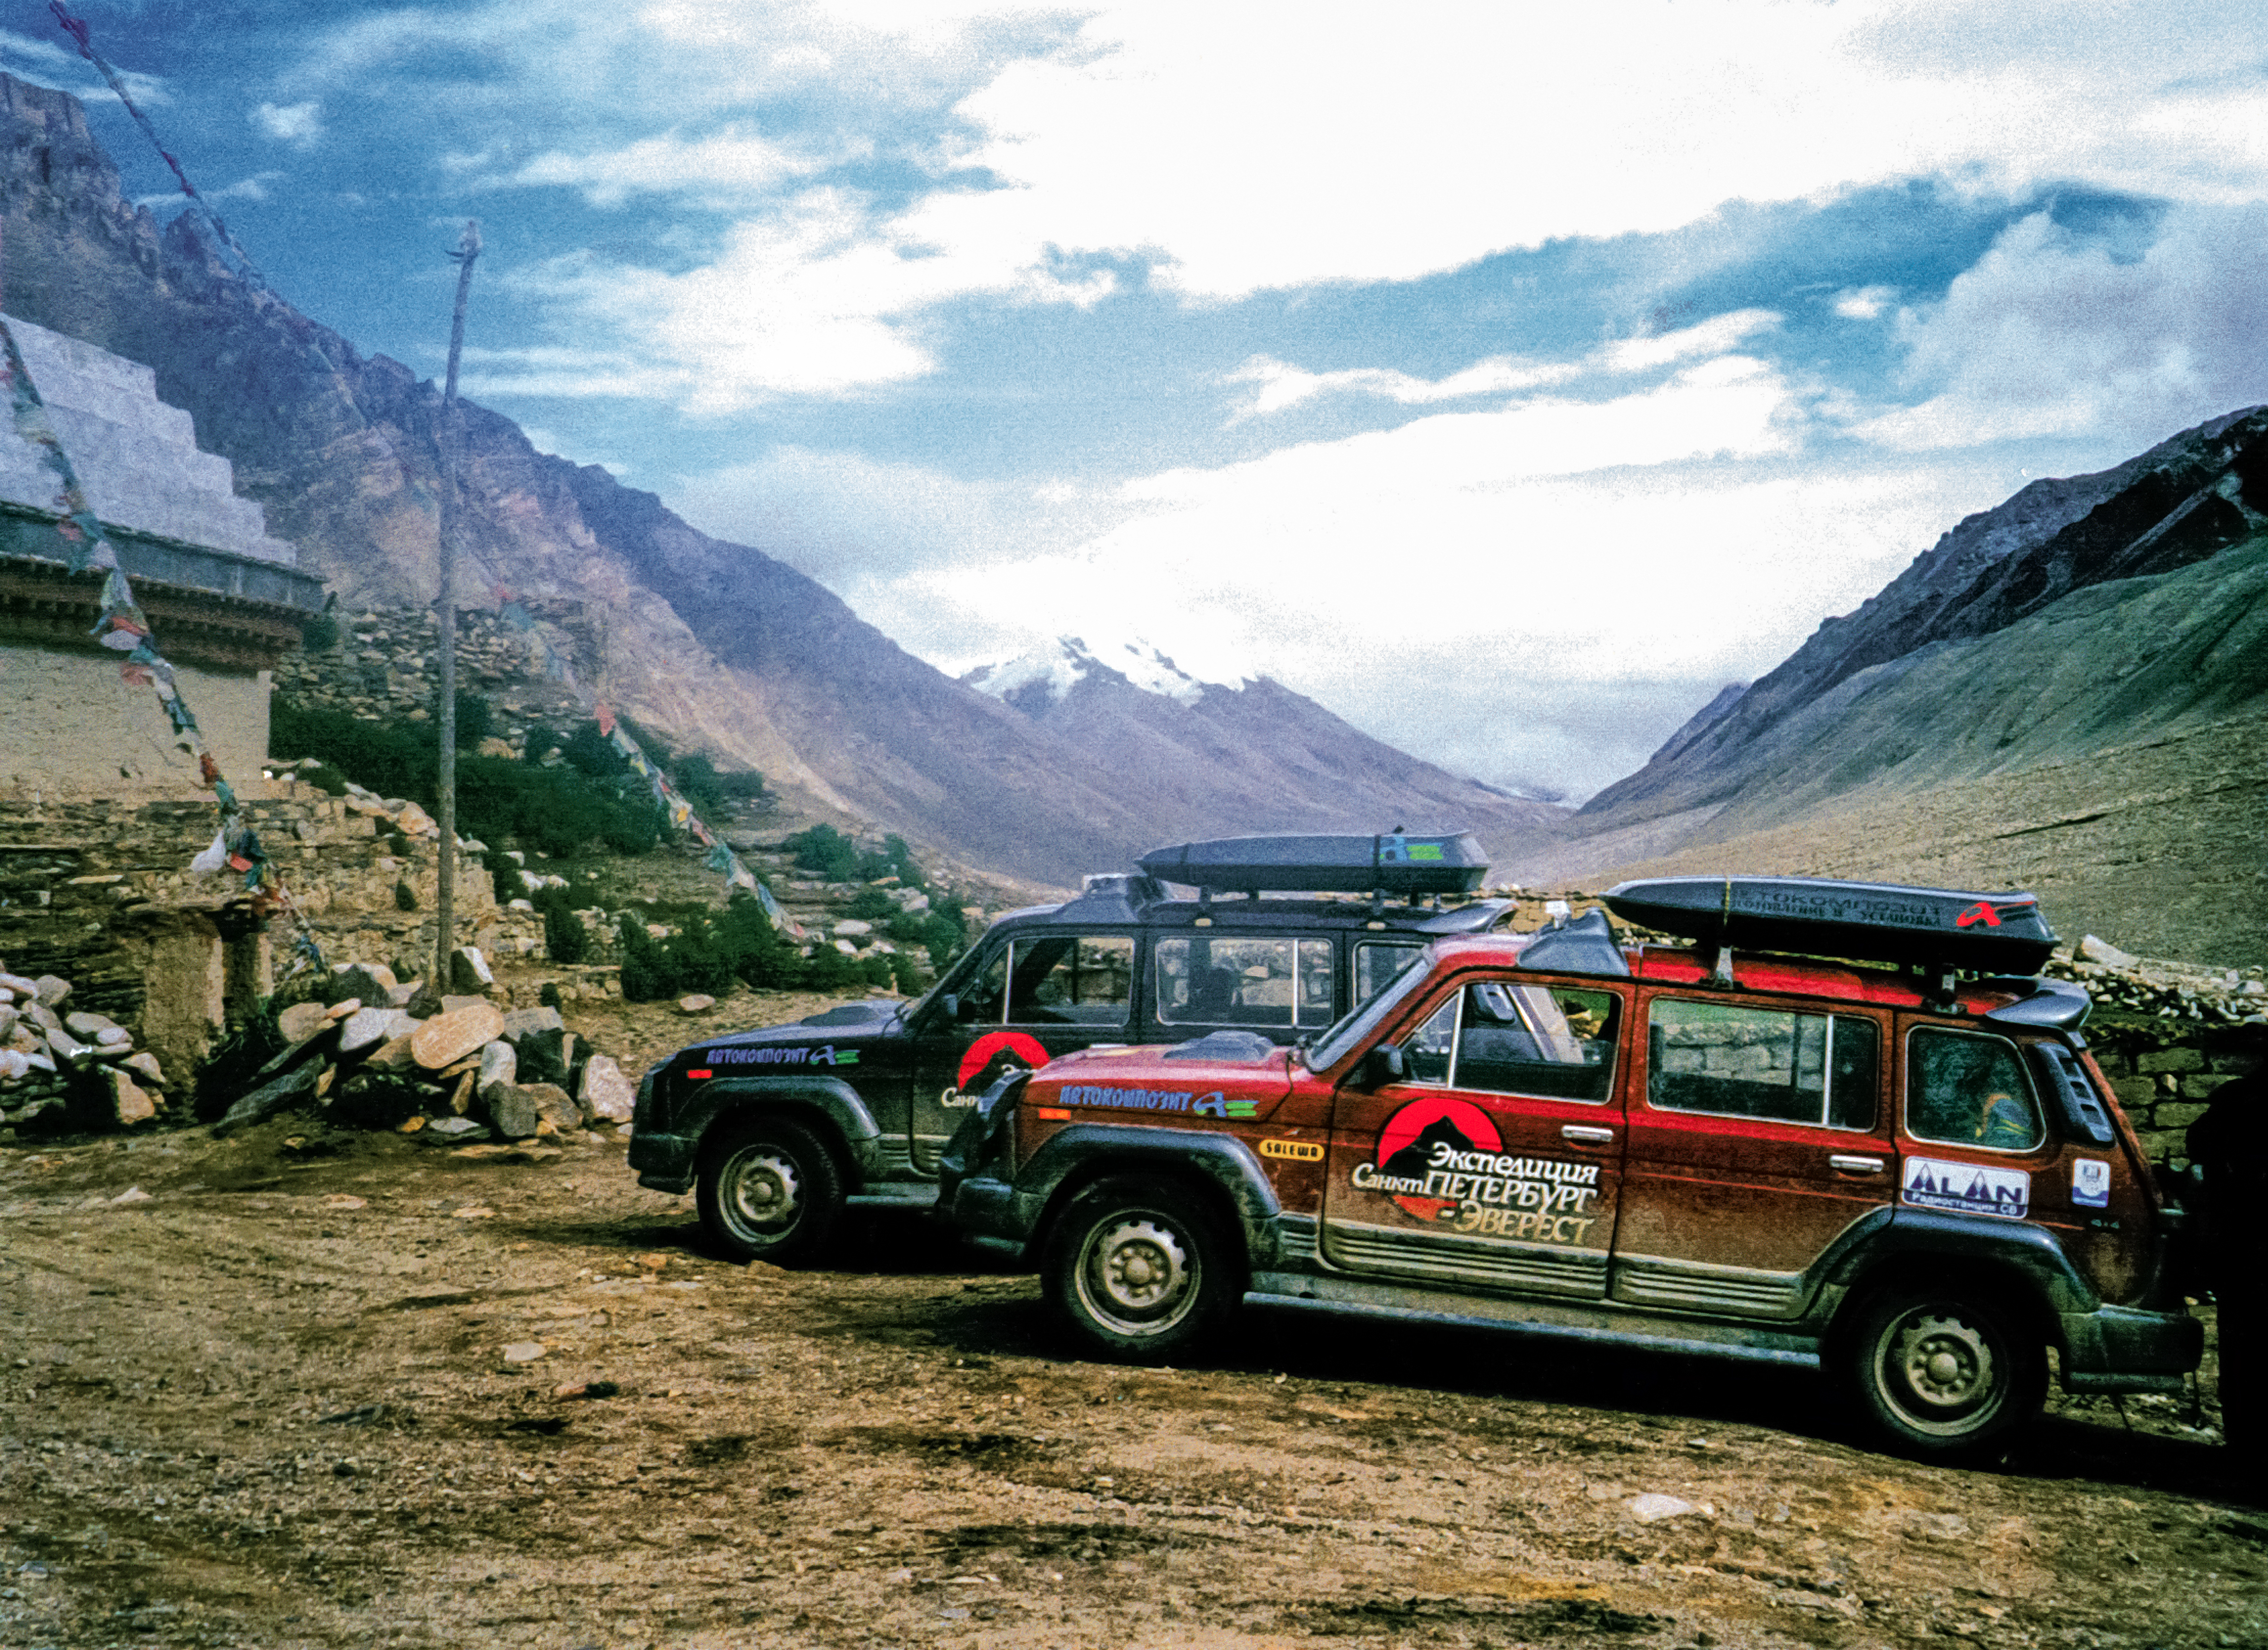 The Niva has several altitude world records to its name. In 1998, the vehicle climbed to Everest Base Camp (5,200 meters above sea level) without assistance. The British Land Rover tried to surpass this achievement, but could only rise to the record altitude of 5,642 meters with the help of cables and winches. A year later, the Niva drove onto the Tibetan plateau in the Himalayas (5,726 m above sea level).